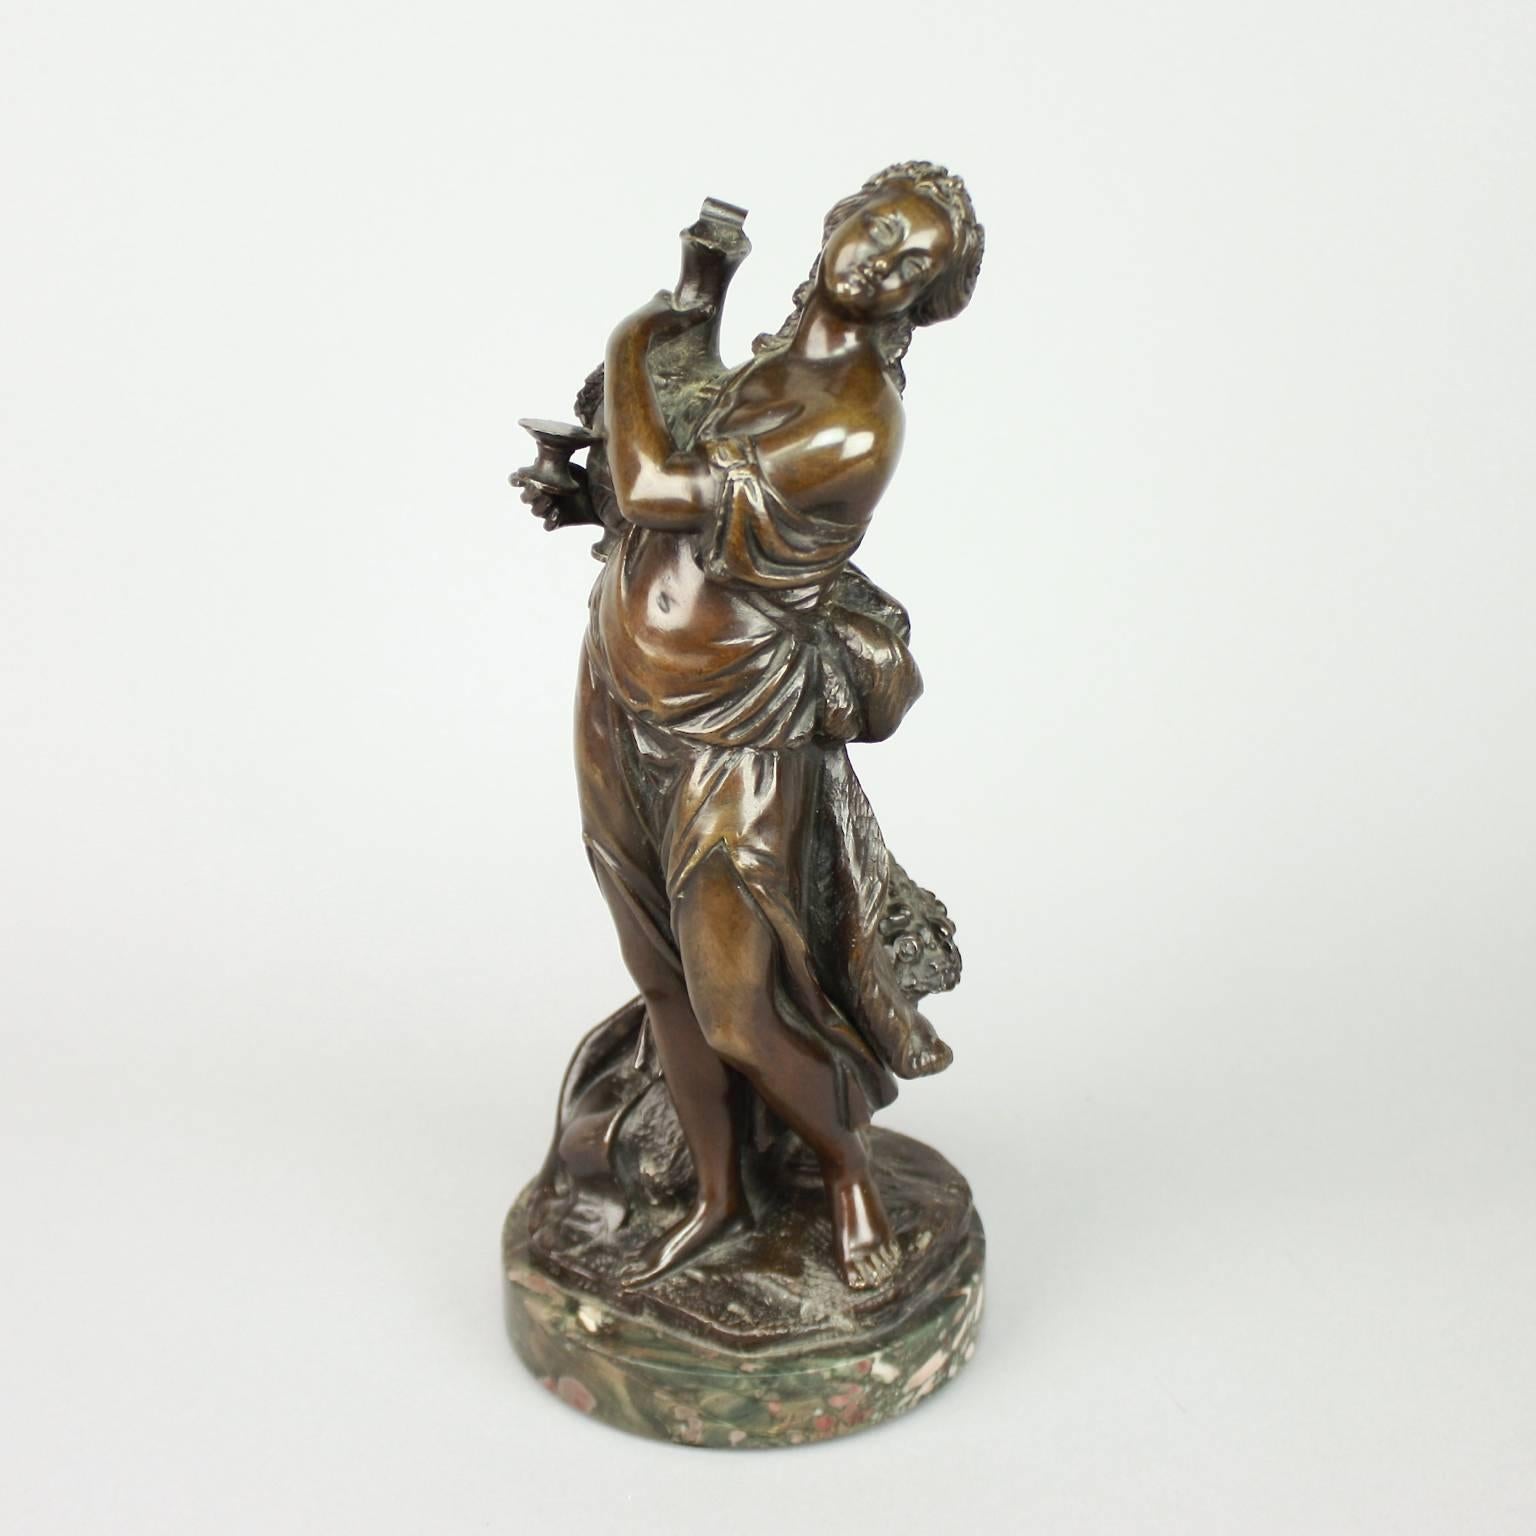 Pair of French 18th Century Louis XVI Bronze Sculpture of Faun and Bacchante

Rare pair of bronze sculptures depicting Bacchante and Faun after a design by Jean-Hugues Taraval in 1773. Jean-Hugues Taraval (1729-1785) was a French painter known for